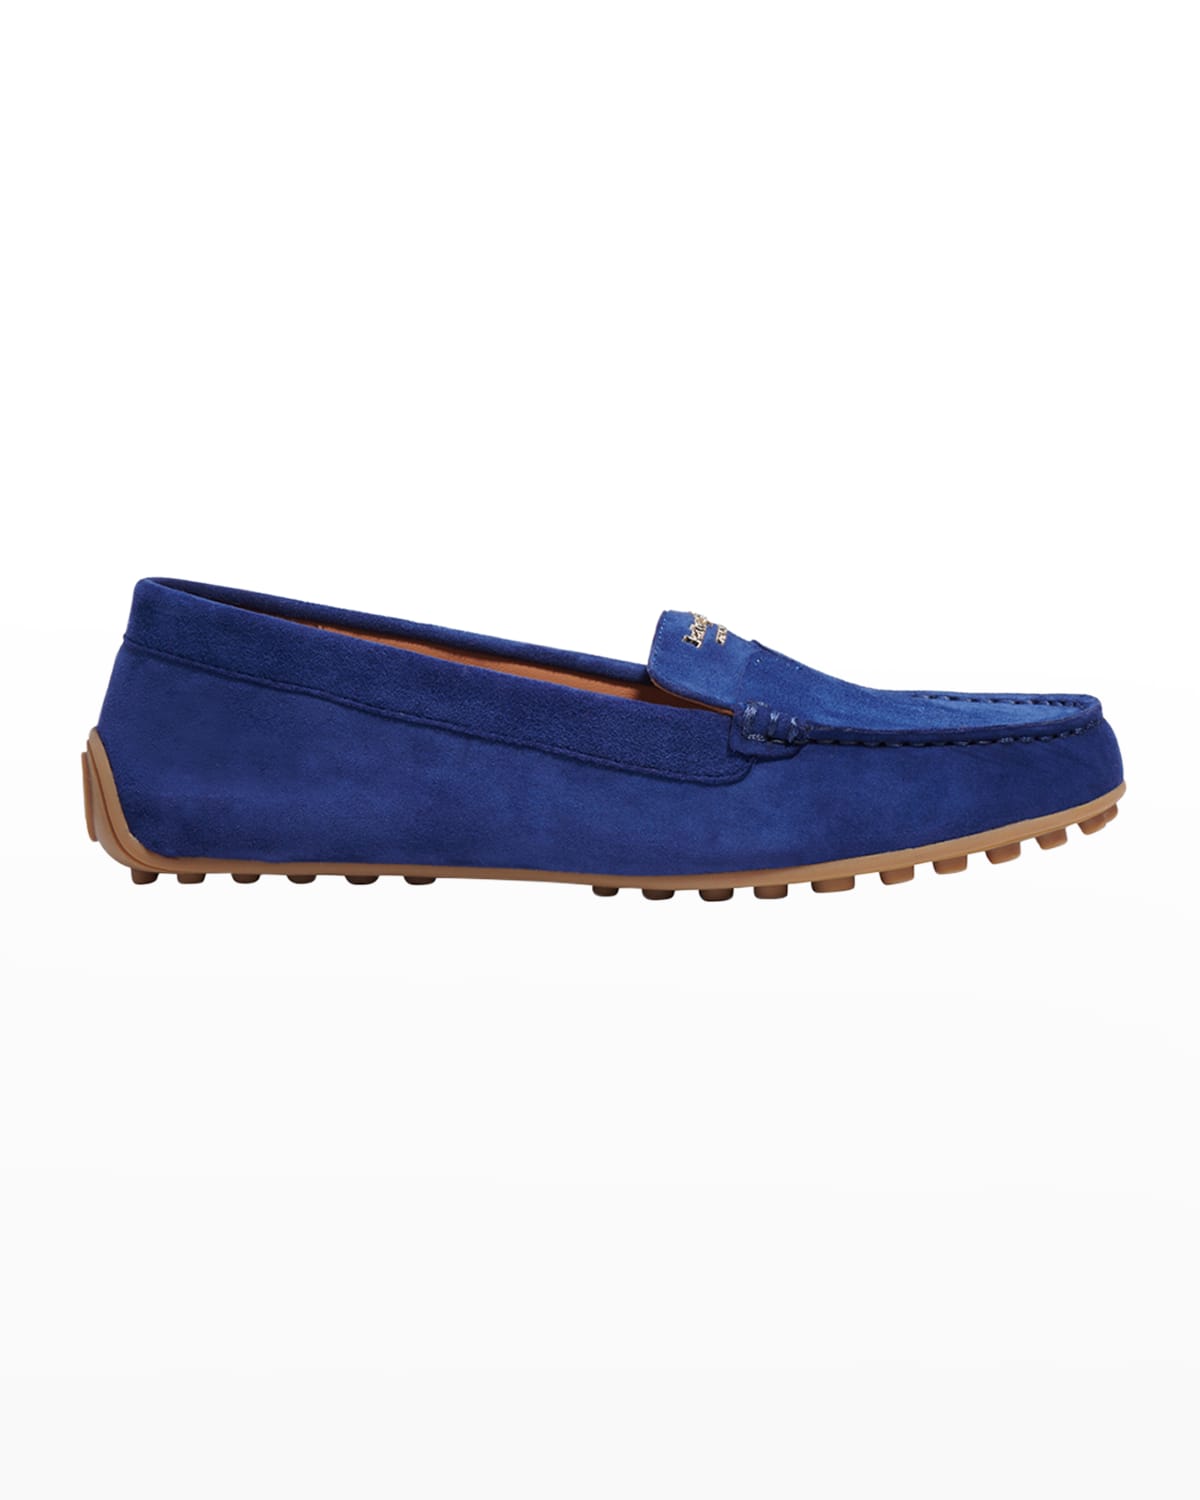 KATE SPADE DECK SUEDE DRIVER LOAFERS